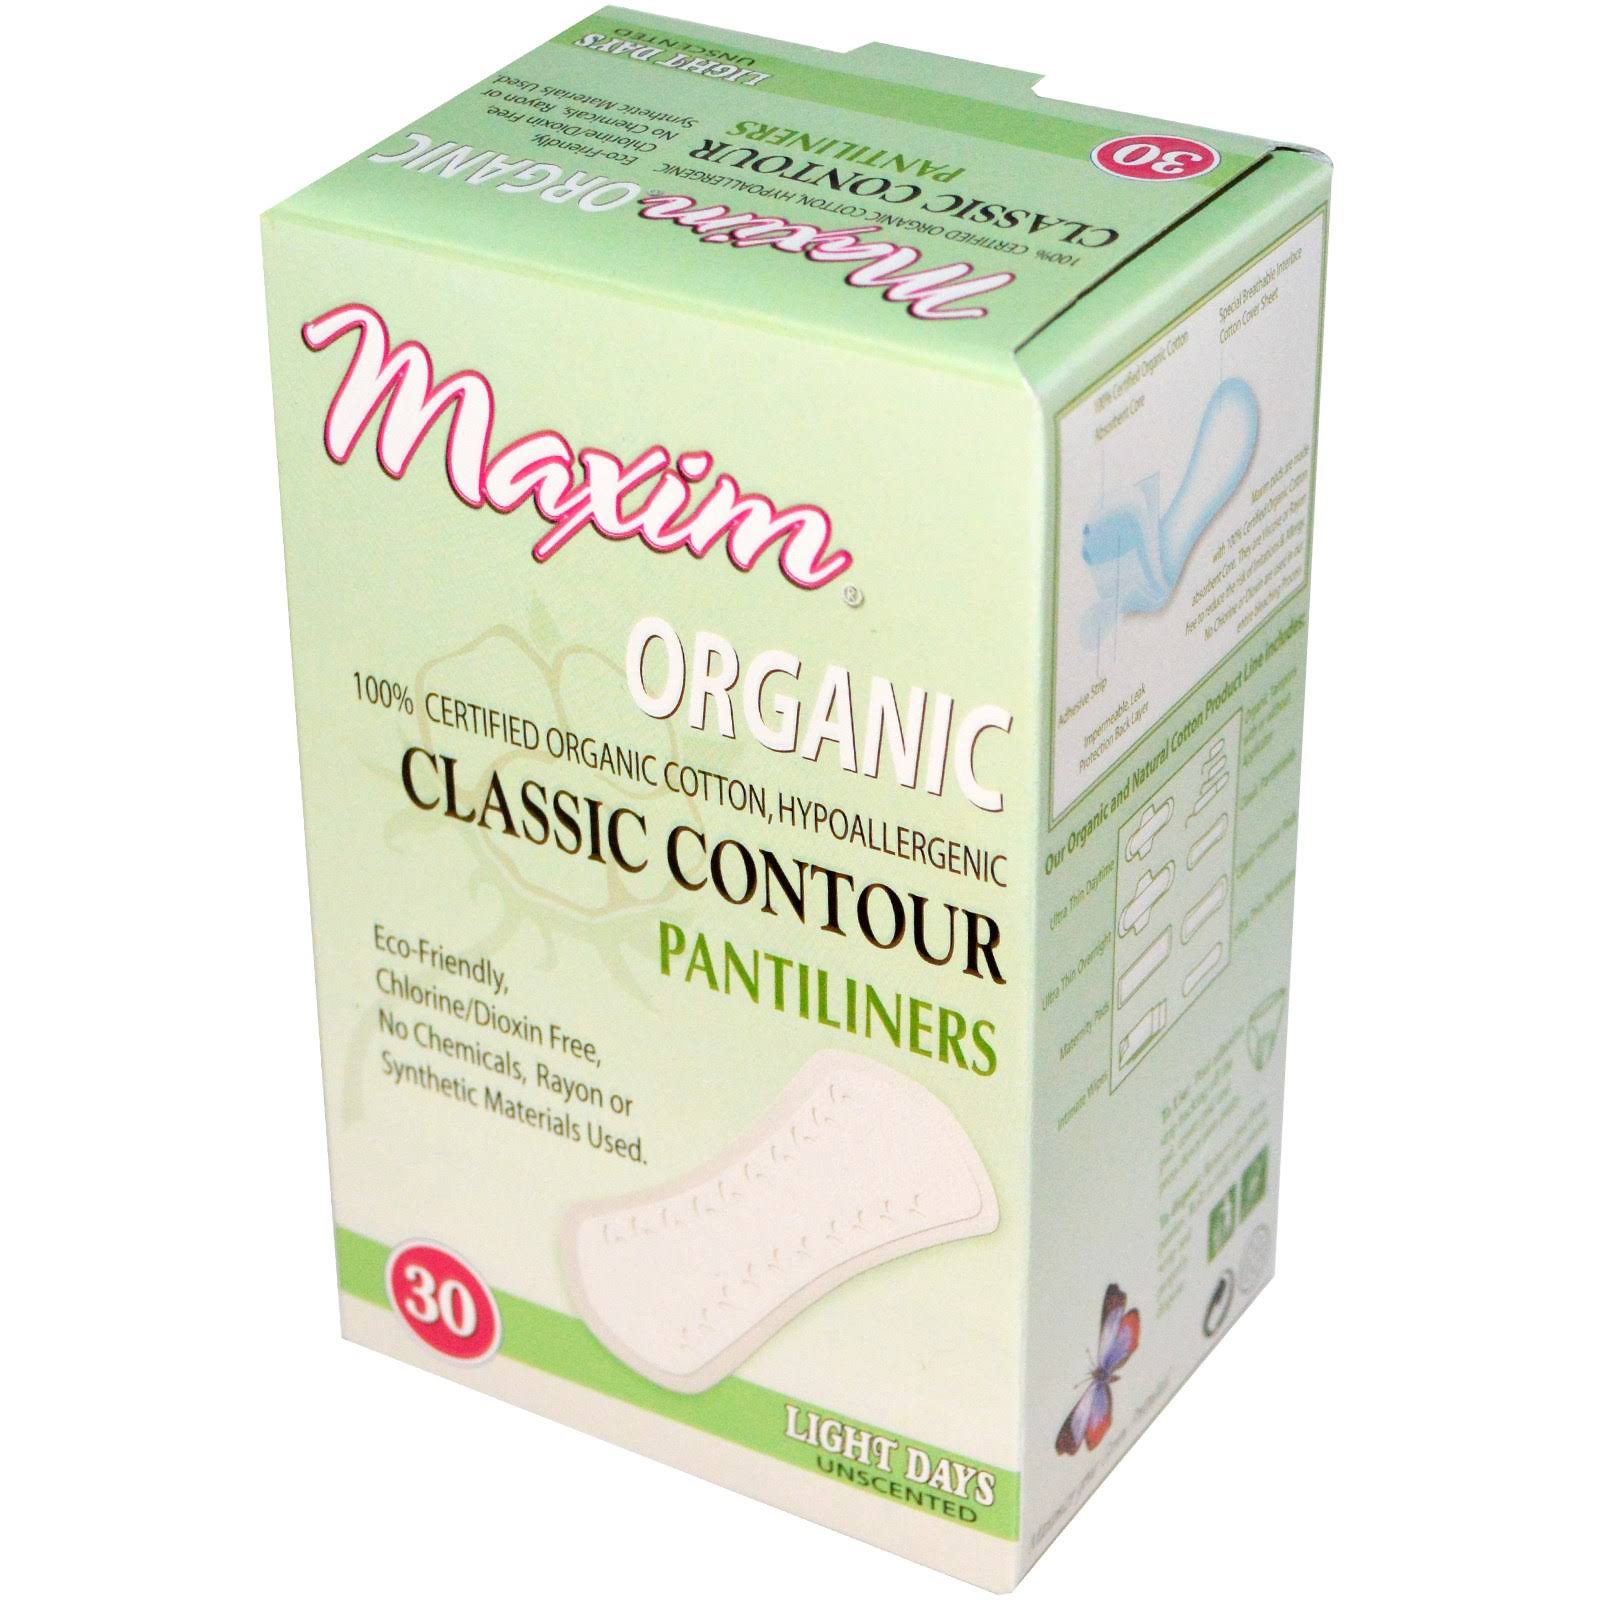 Maxim Organic Contour Hypoallergenic Panty Liners - Light Days, Unscented, 30ct